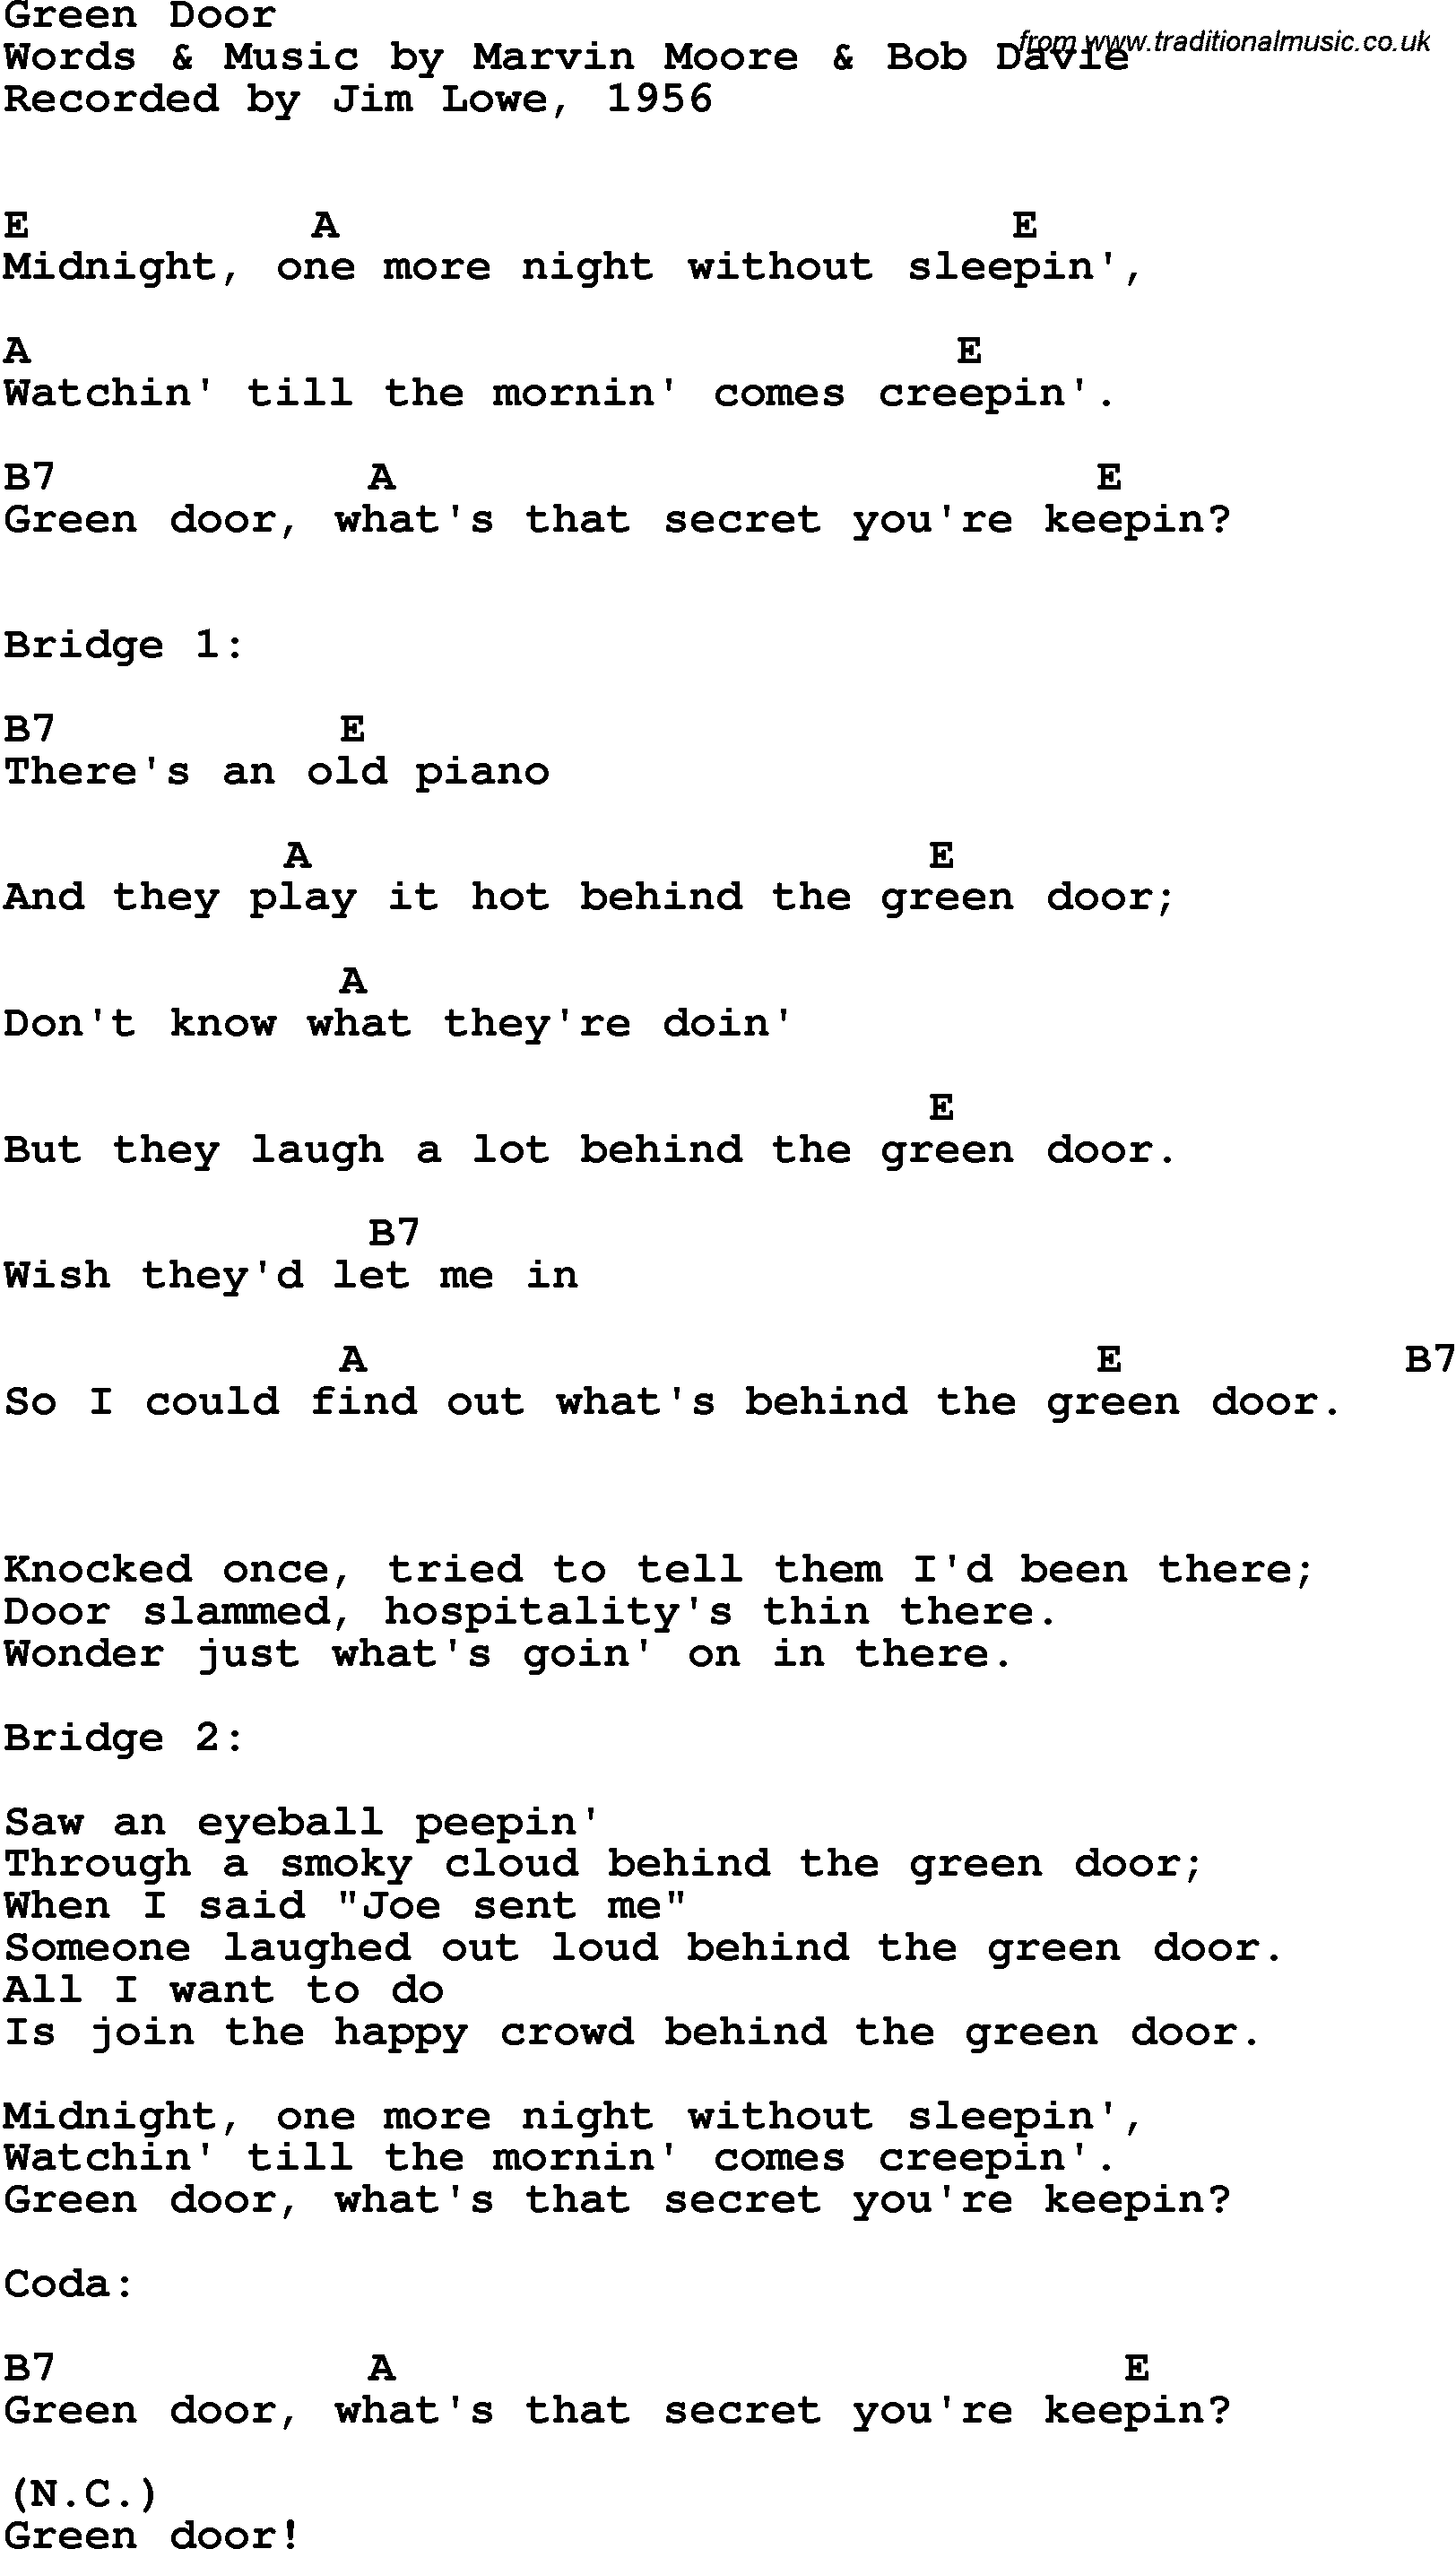 Song Lyrics with guitar chords for Green Door - Jim Lowe, 1956